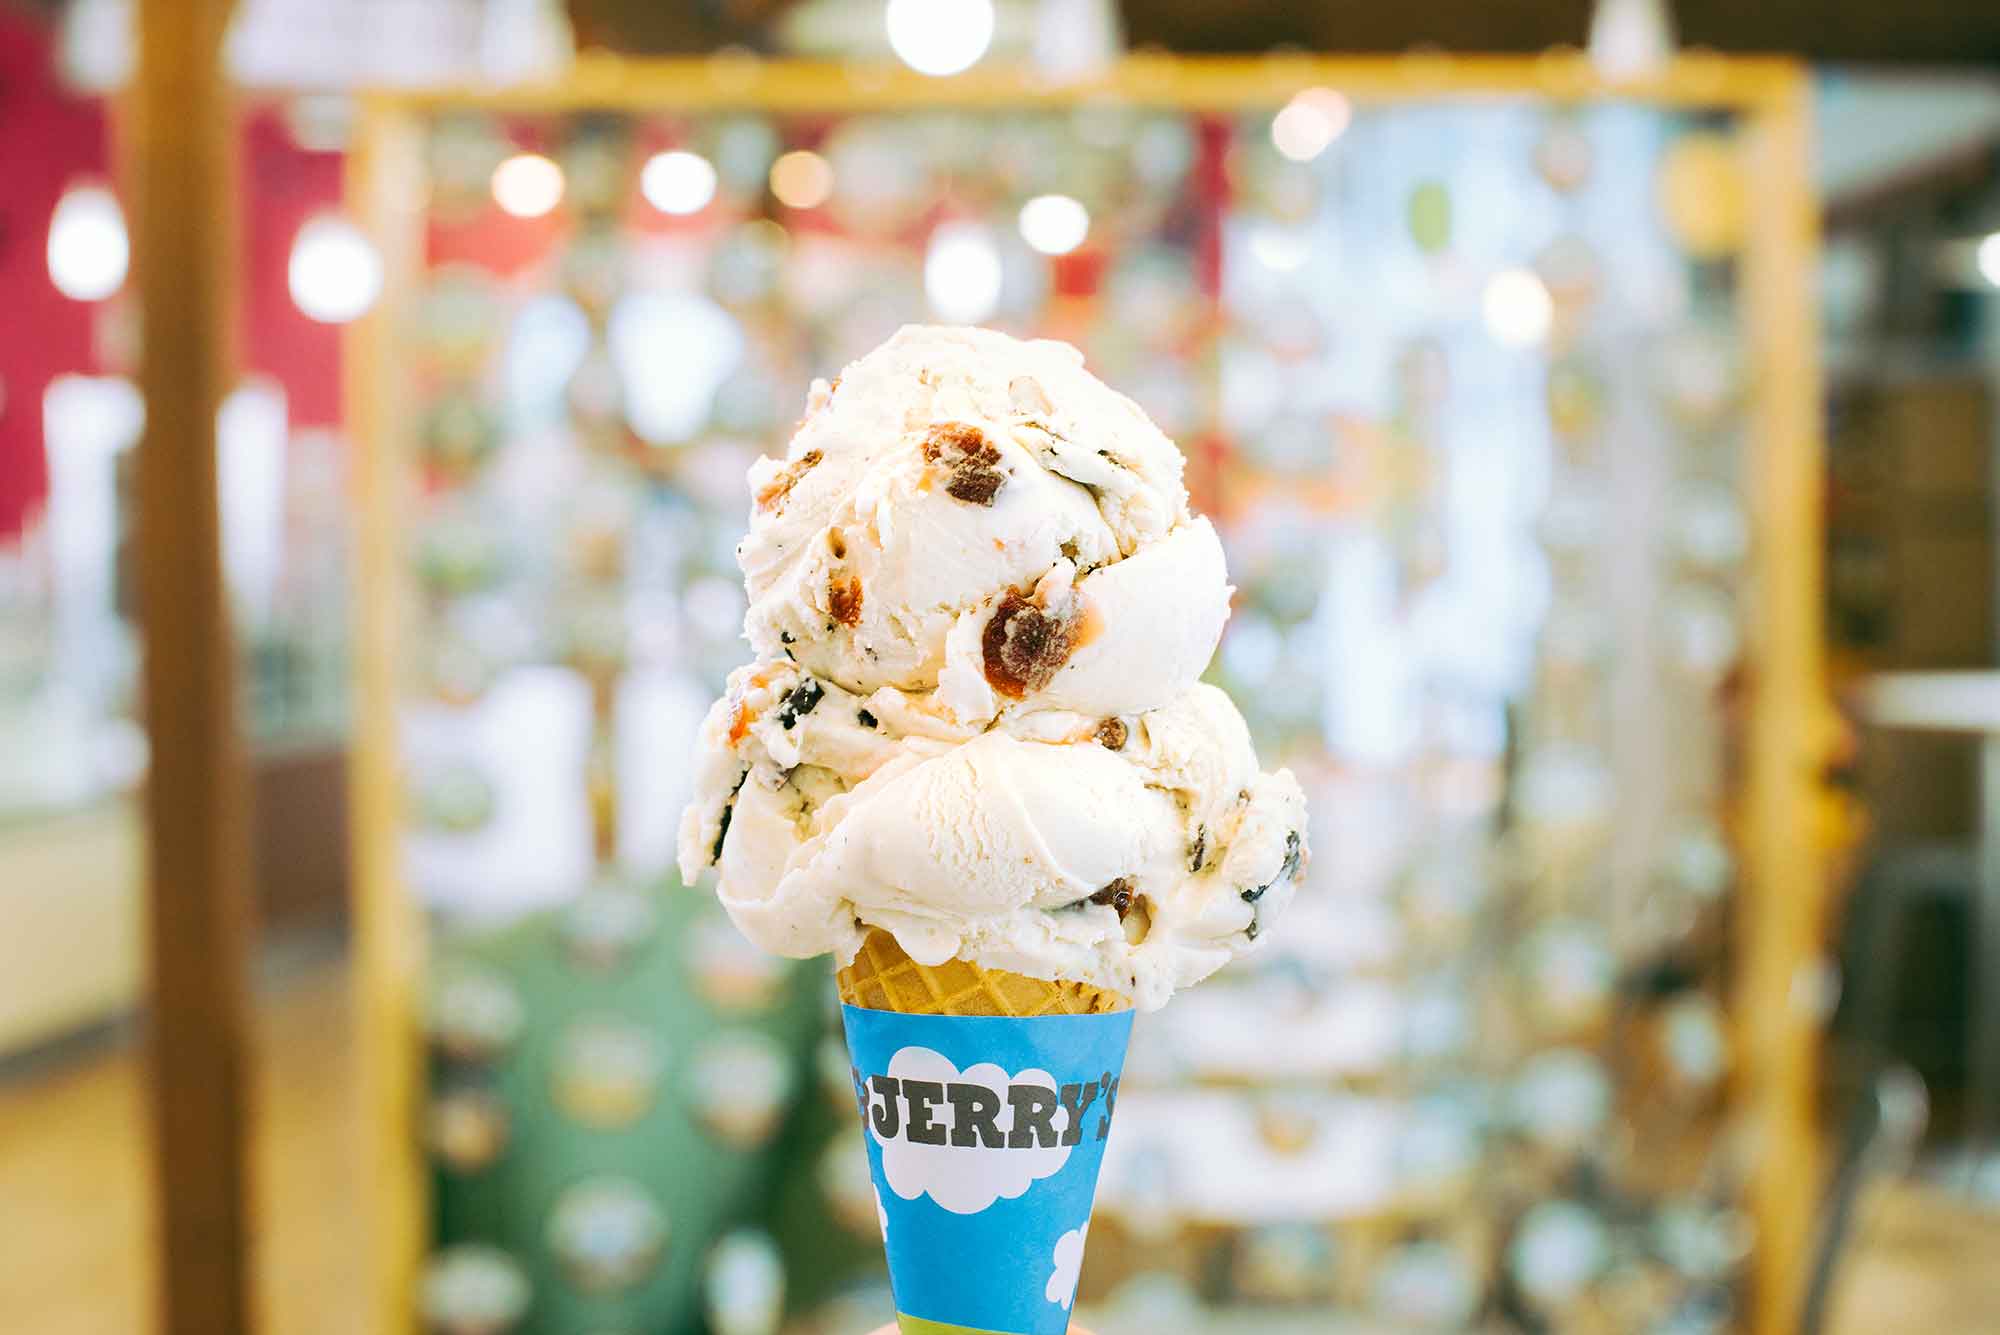 A Cherry Garcia ice cream cone is held up against the backdrop of a Ben and Jerry's brick and mortar ice cream shop.